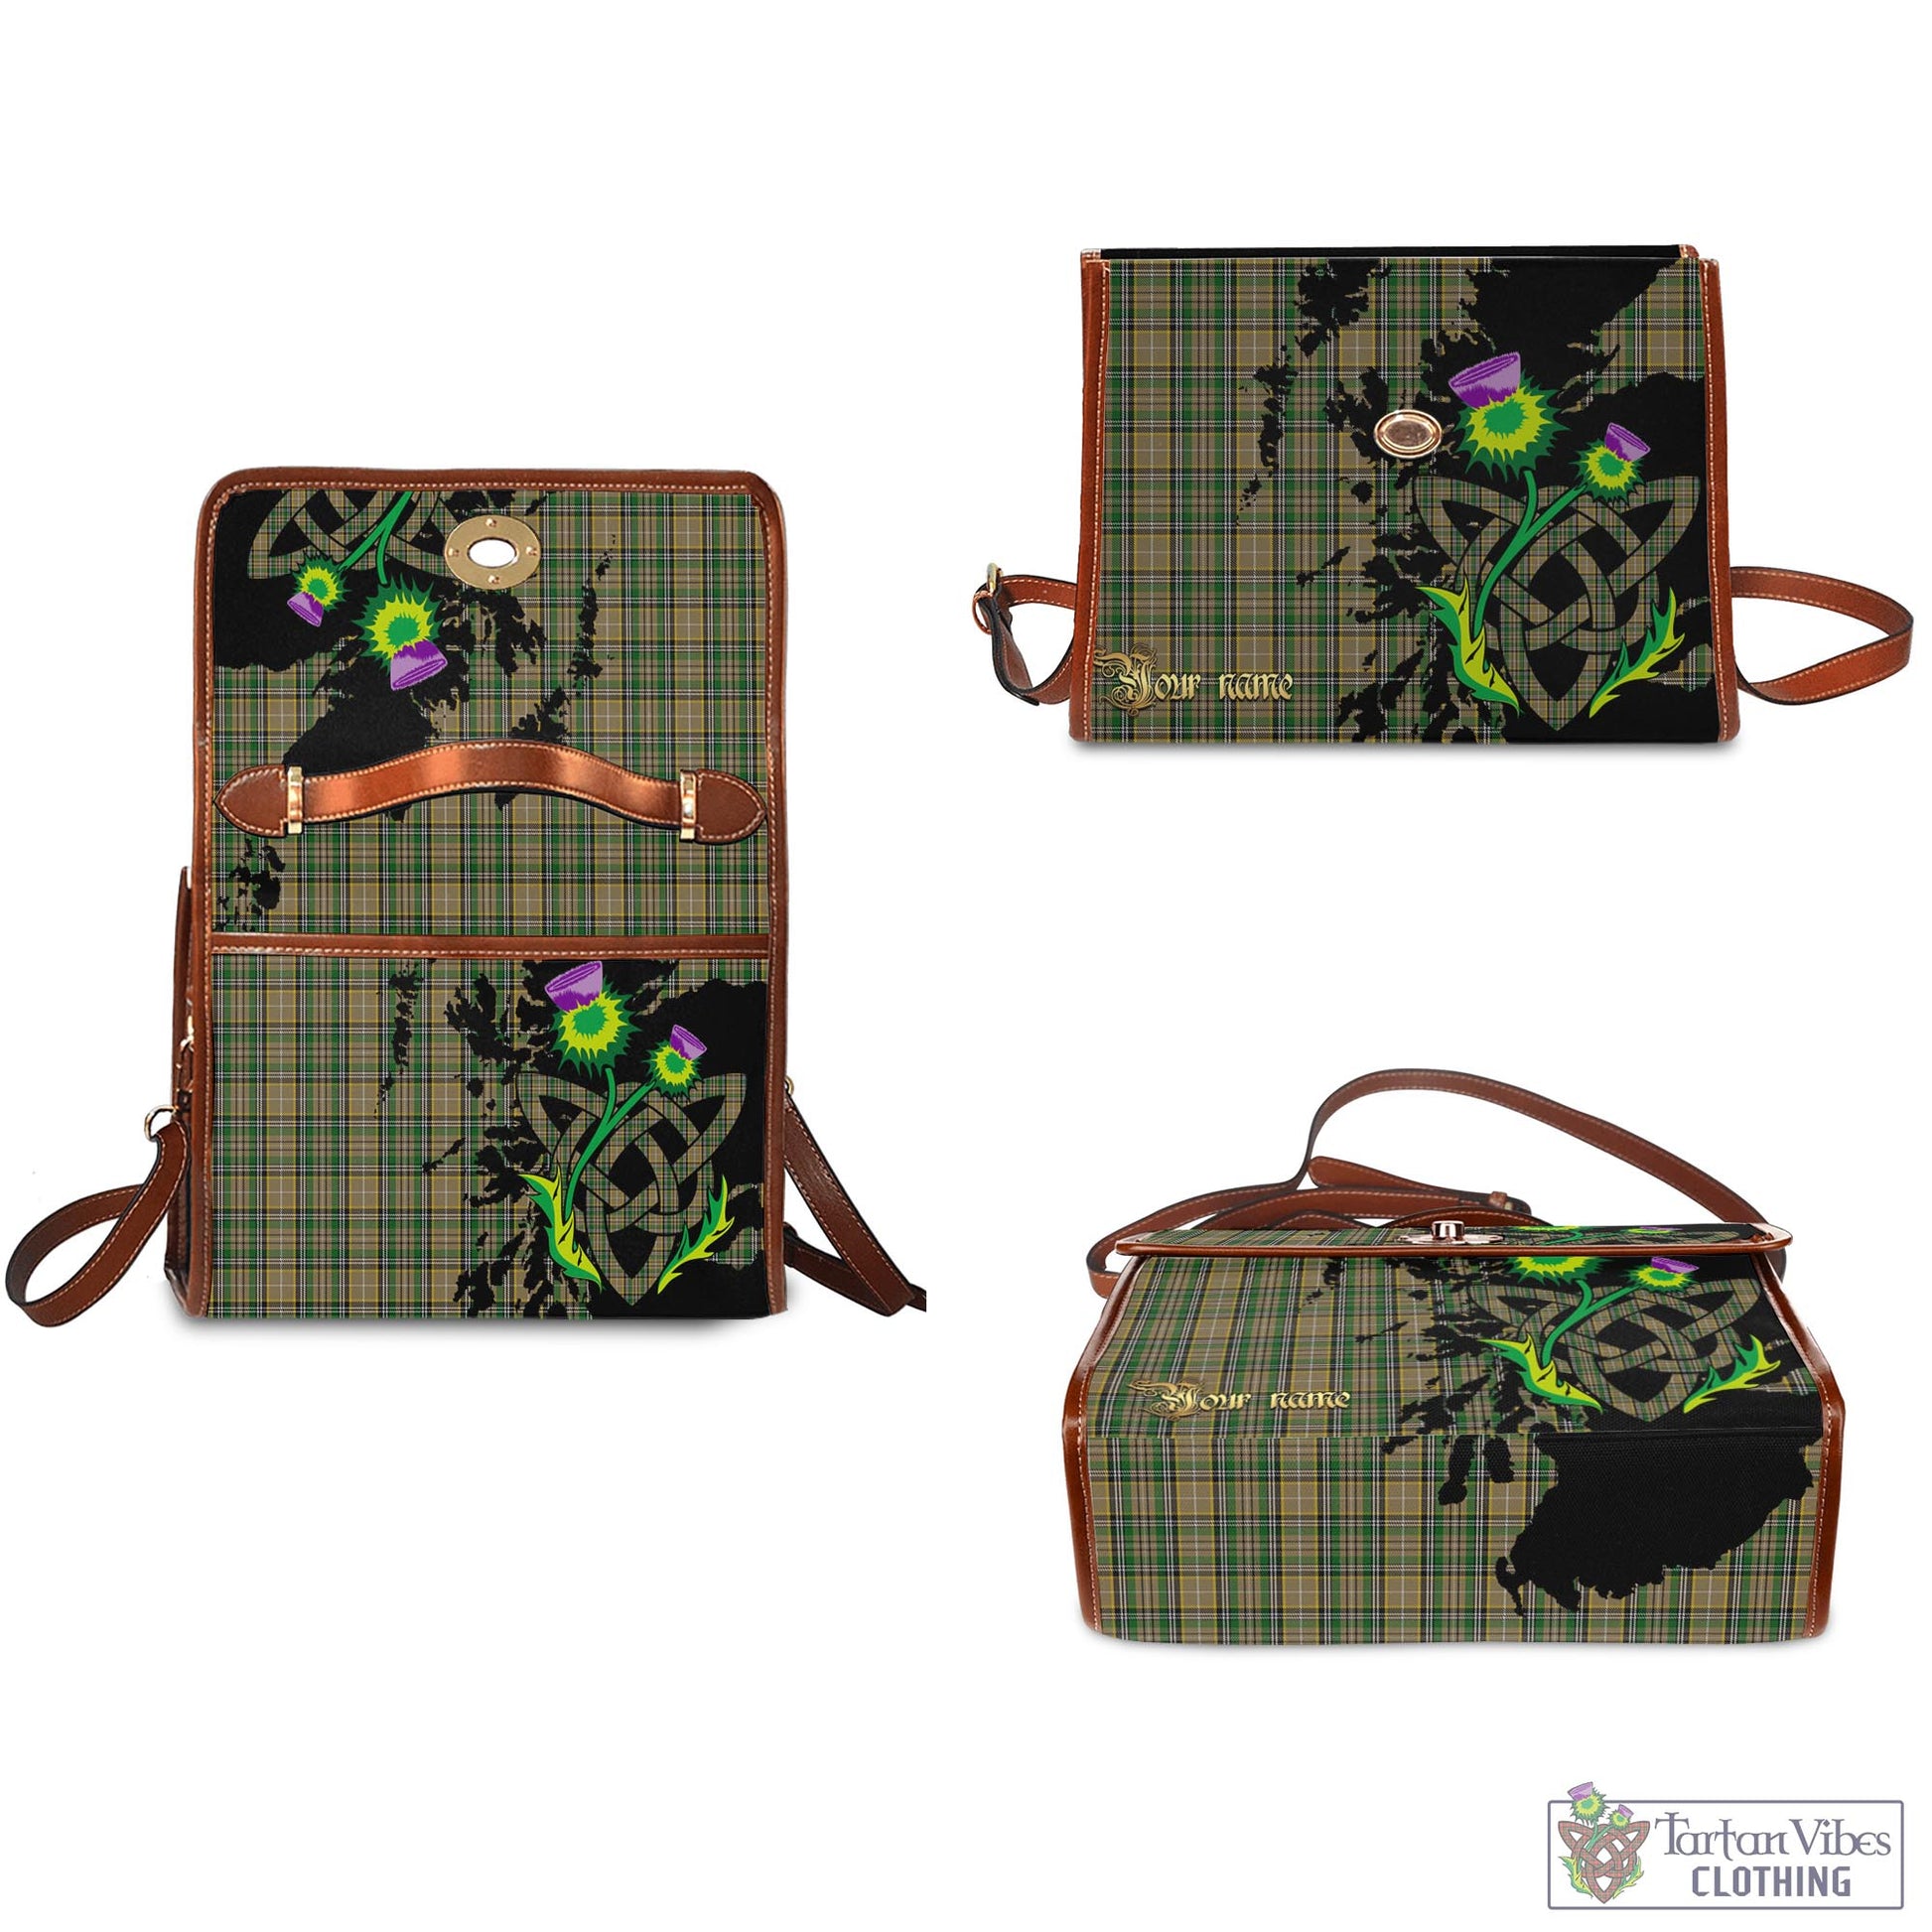 Tartan Vibes Clothing O'Farrell Tartan Waterproof Canvas Bag with Scotland Map and Thistle Celtic Accents